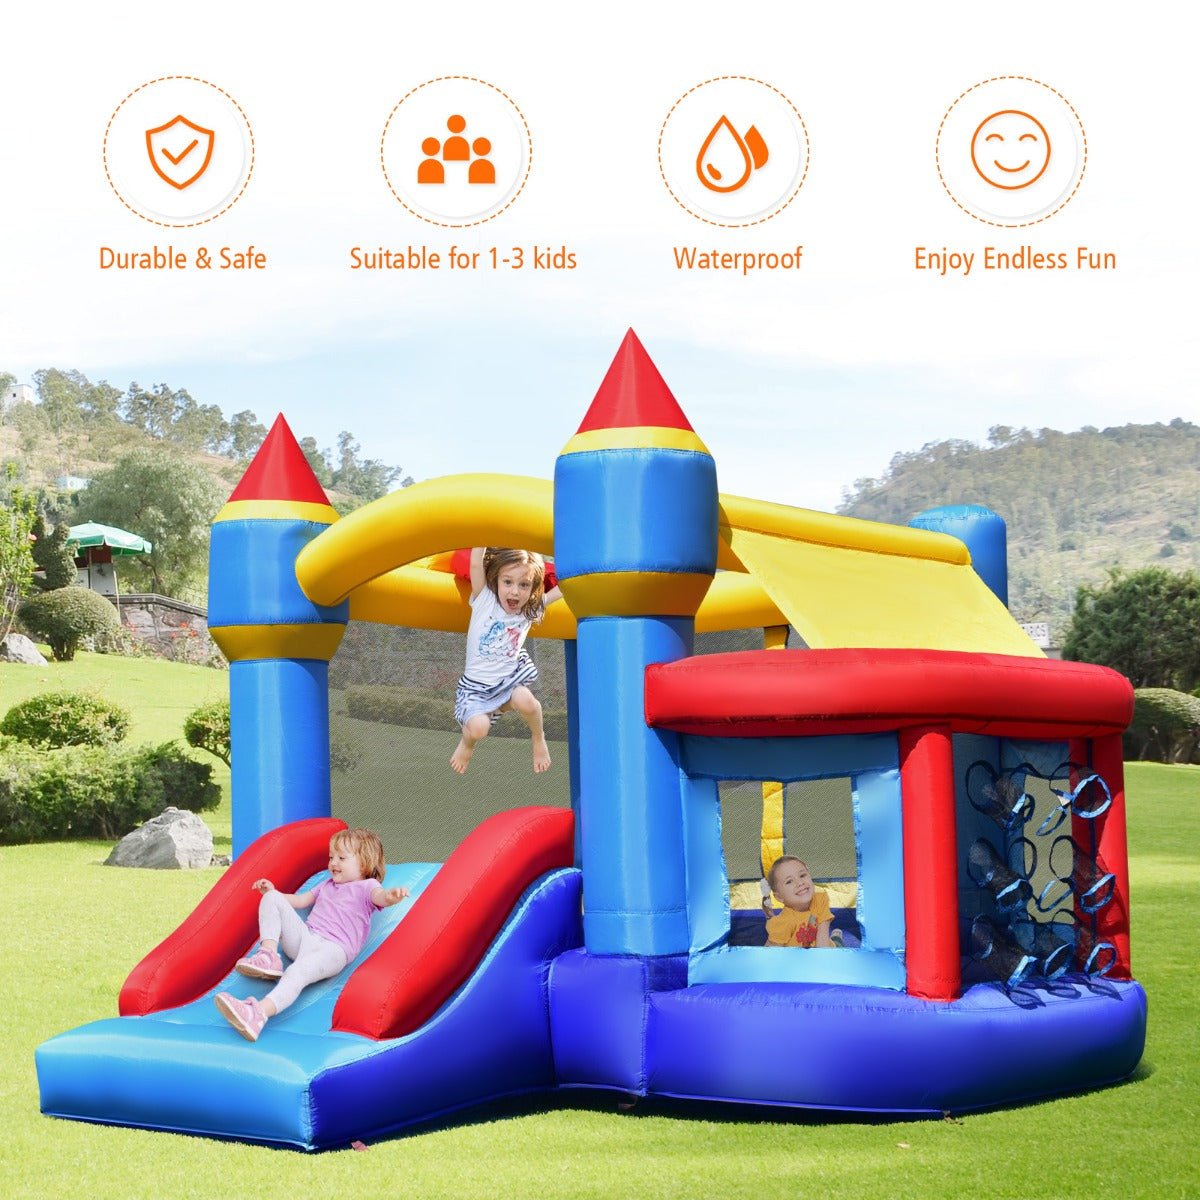 All-in-One Play: 5-in-1 Inflatable Bouncer Castle with Slide for Children